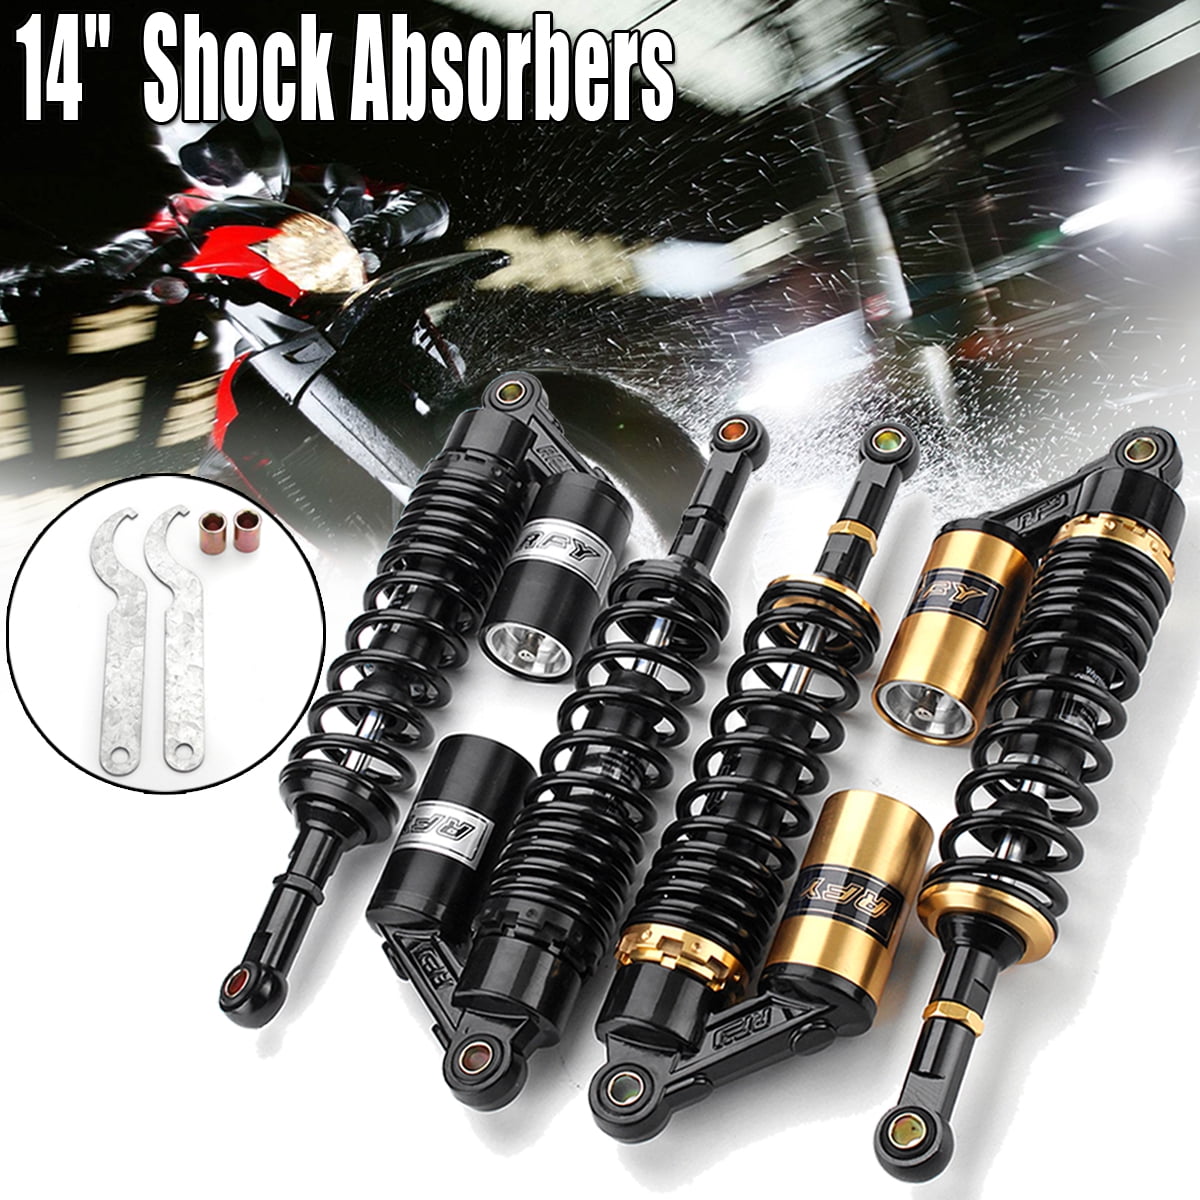 waltyotur 340 mm 13.5 Inch Rear Air Shocks Absorber Suspension Damper Replacement for Honda Yamaha and Most 150cc 750cc Motorcycles 